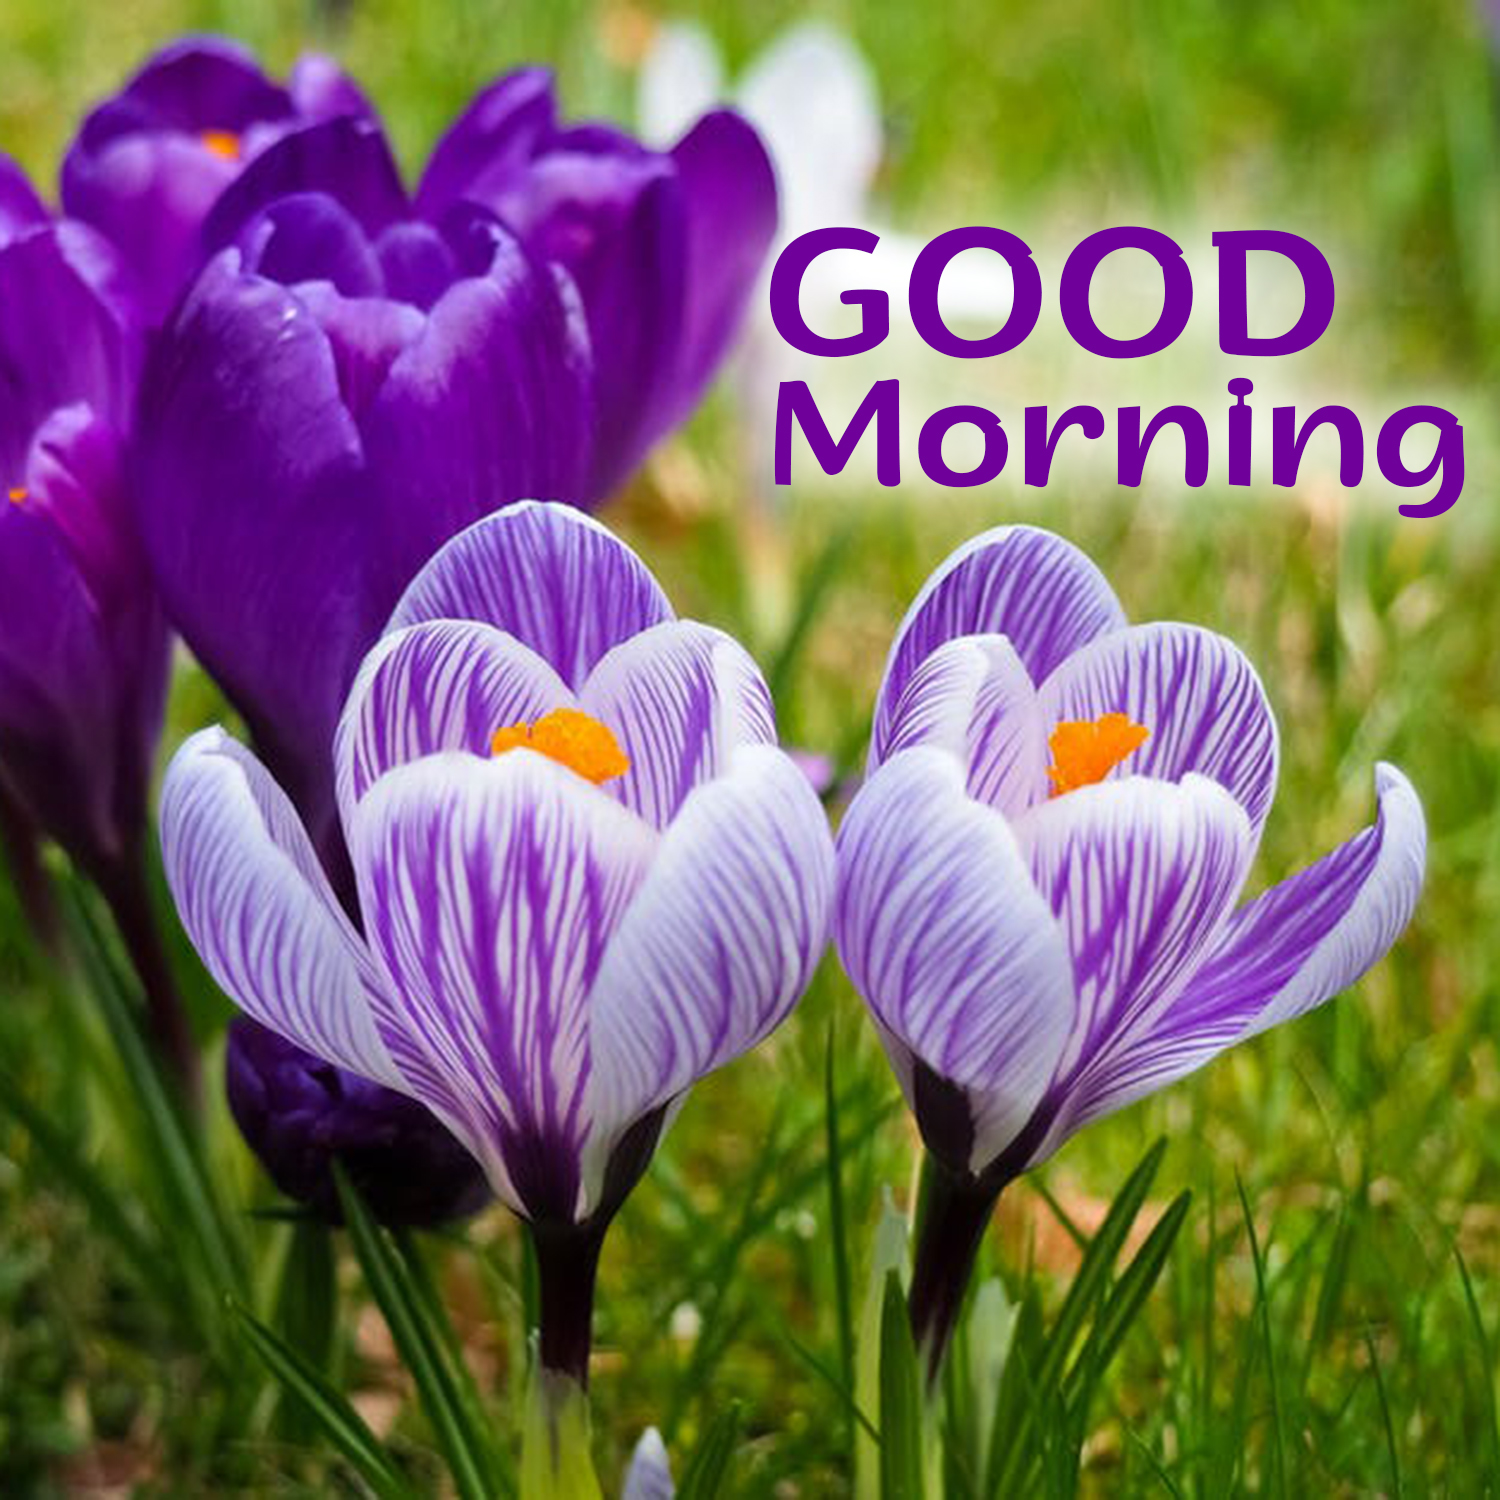 Free and Stunning Good Morning flowers Image for everyone Morning Image, Quotes, Wishes, Messages, greetings & eCards